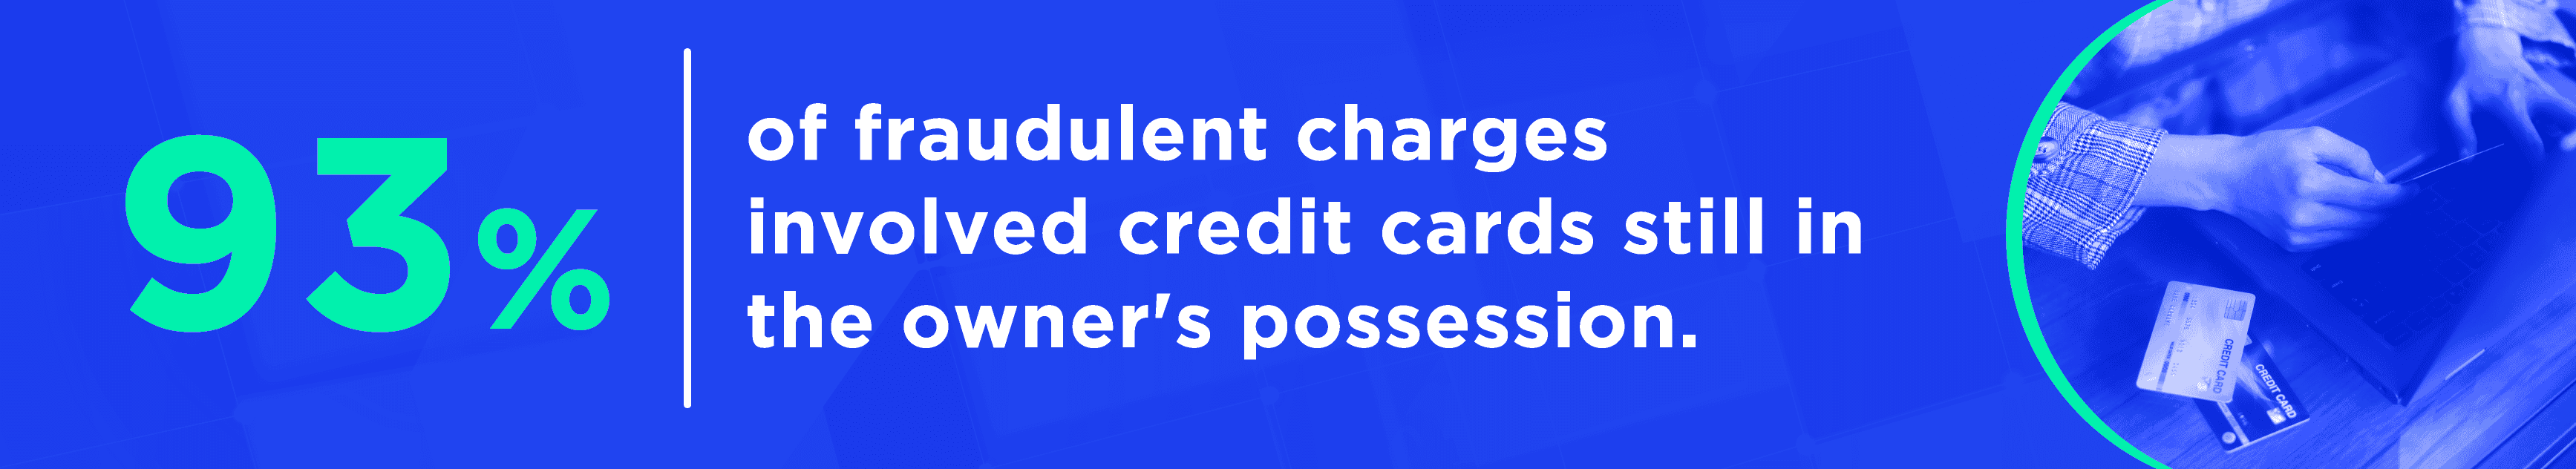 93% of fraudulent charges involved credit cards still in the owner's possession.